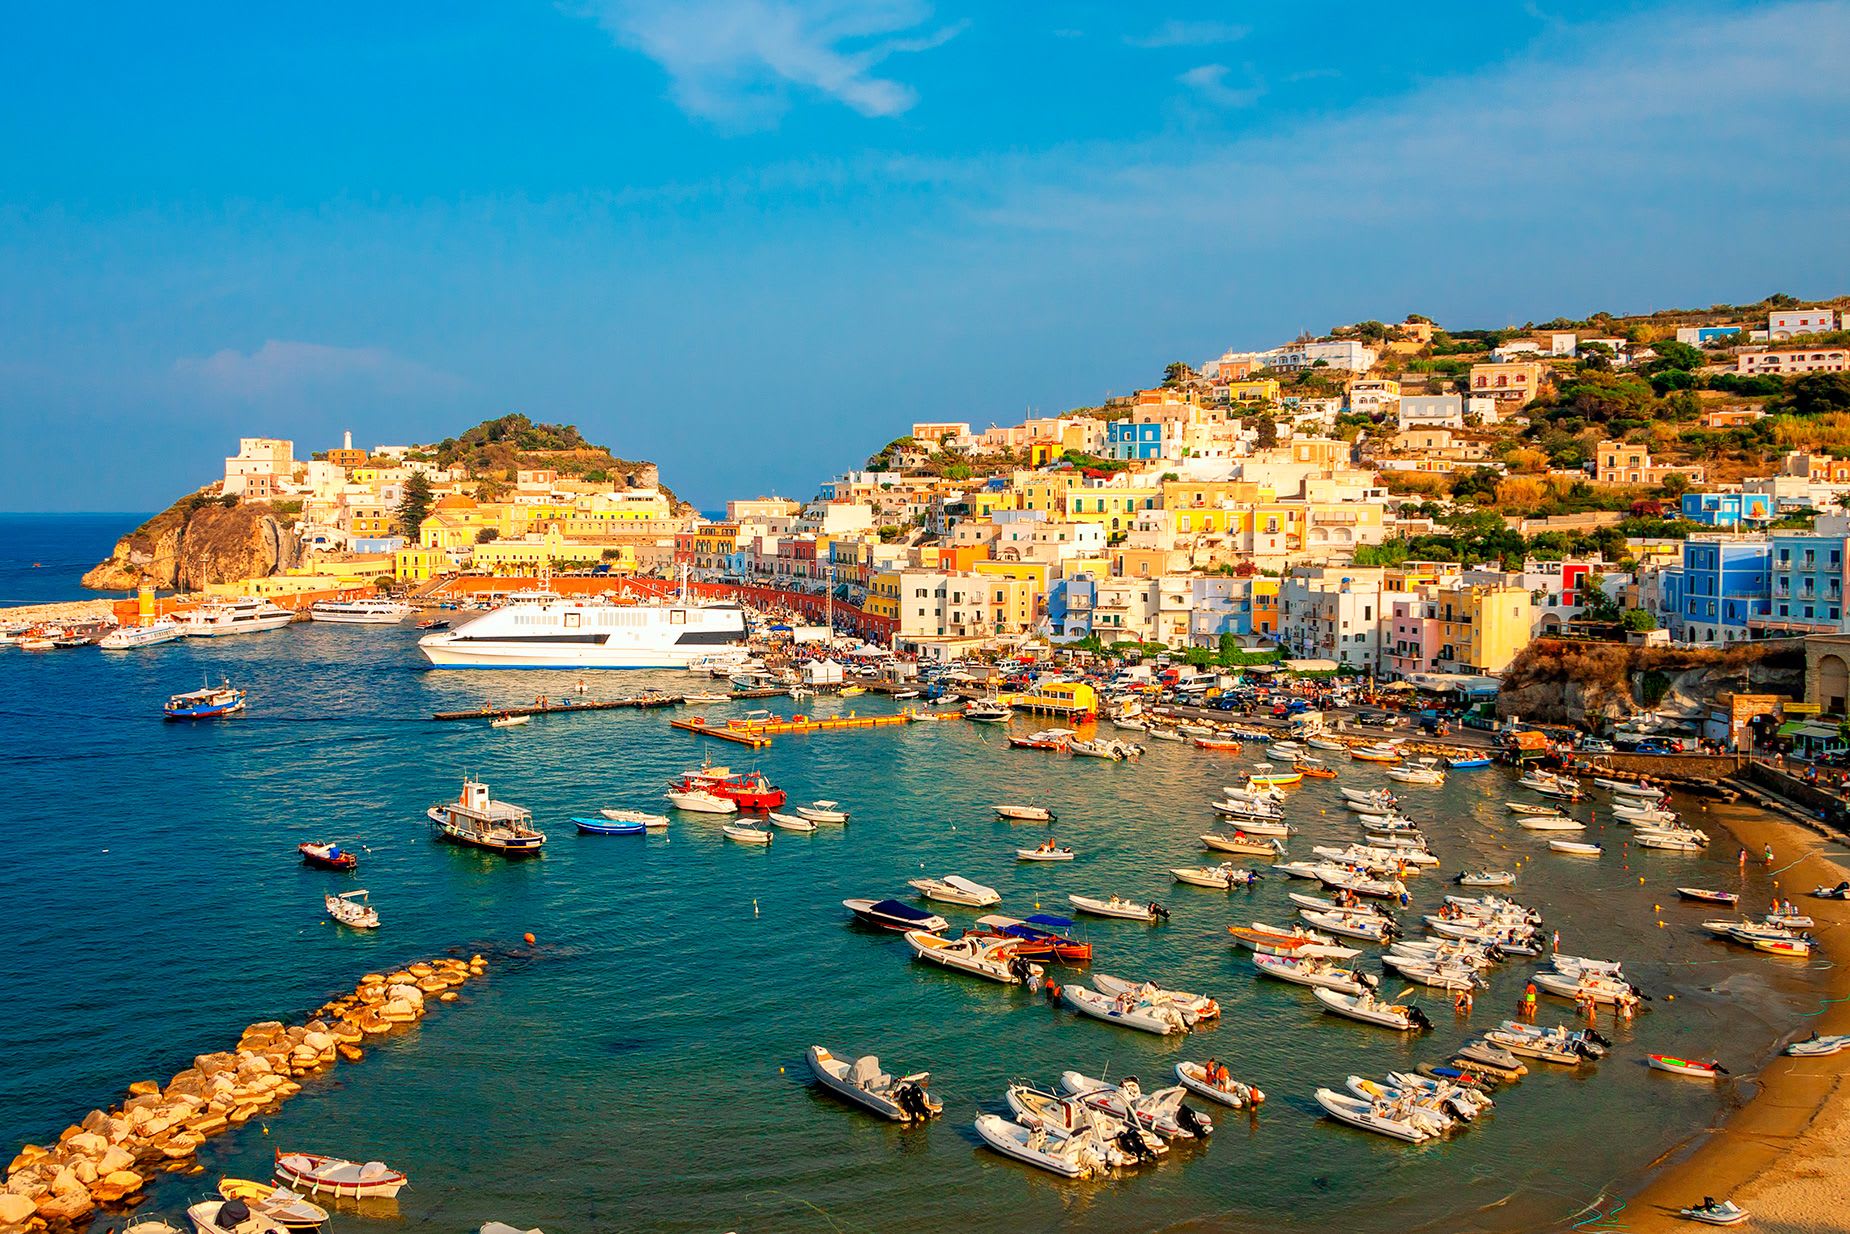 231012093518-03-americans-moved-ancetral-home-italy-ponza.jpg